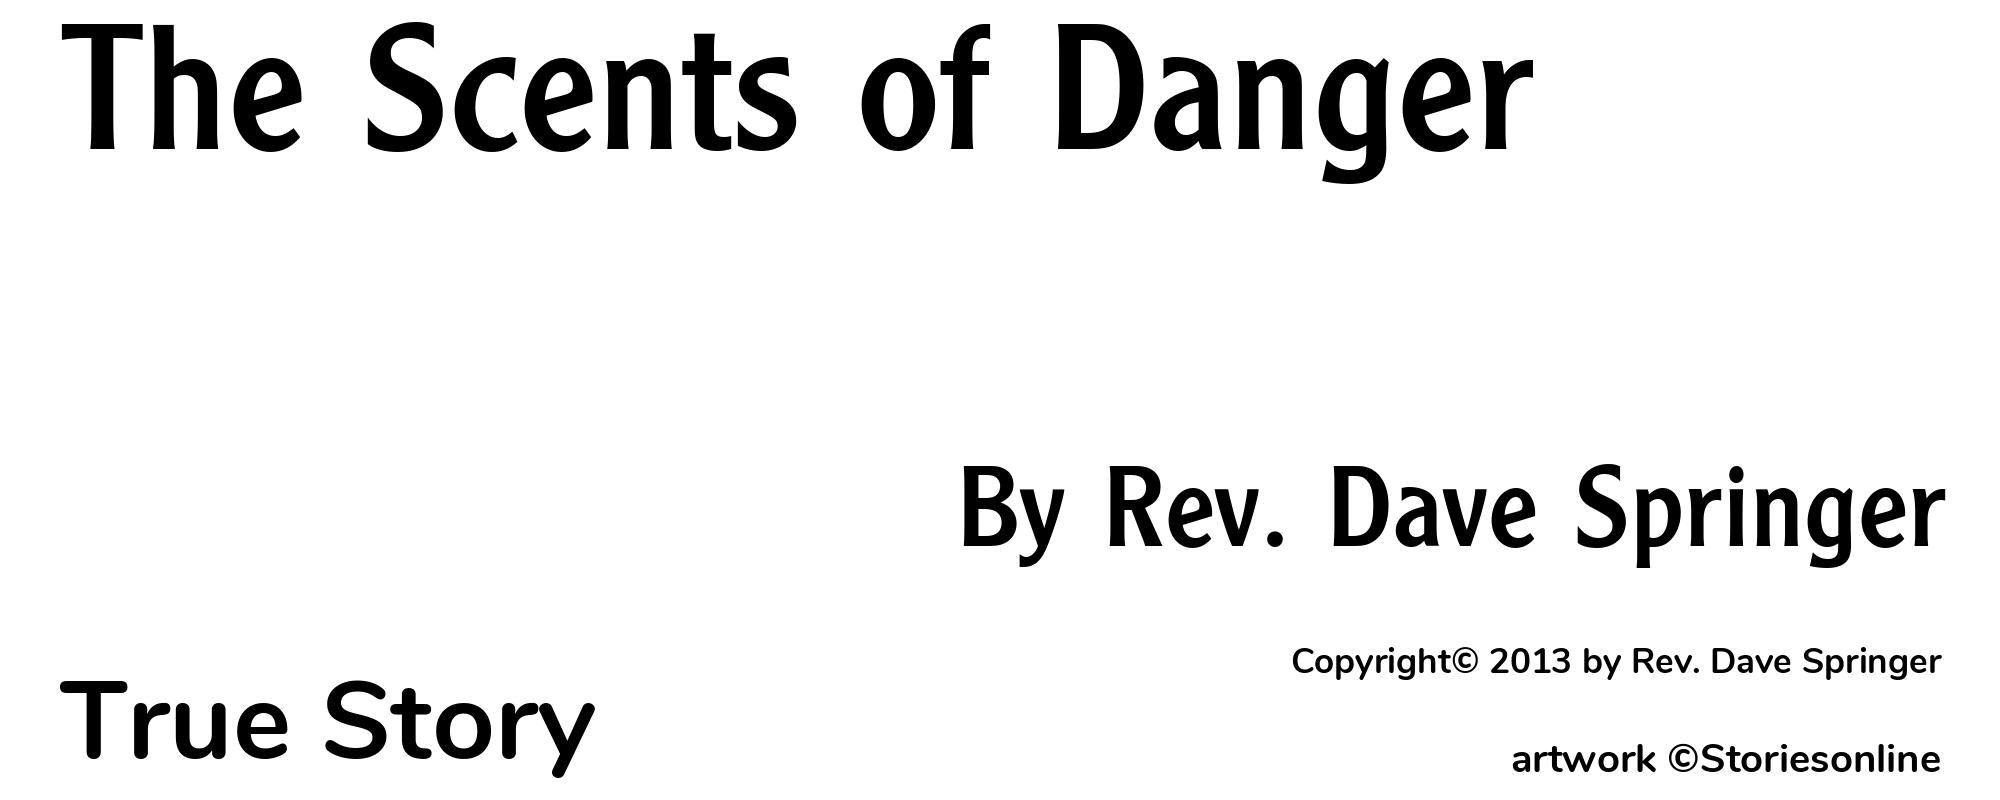 The Scents of Danger - Cover